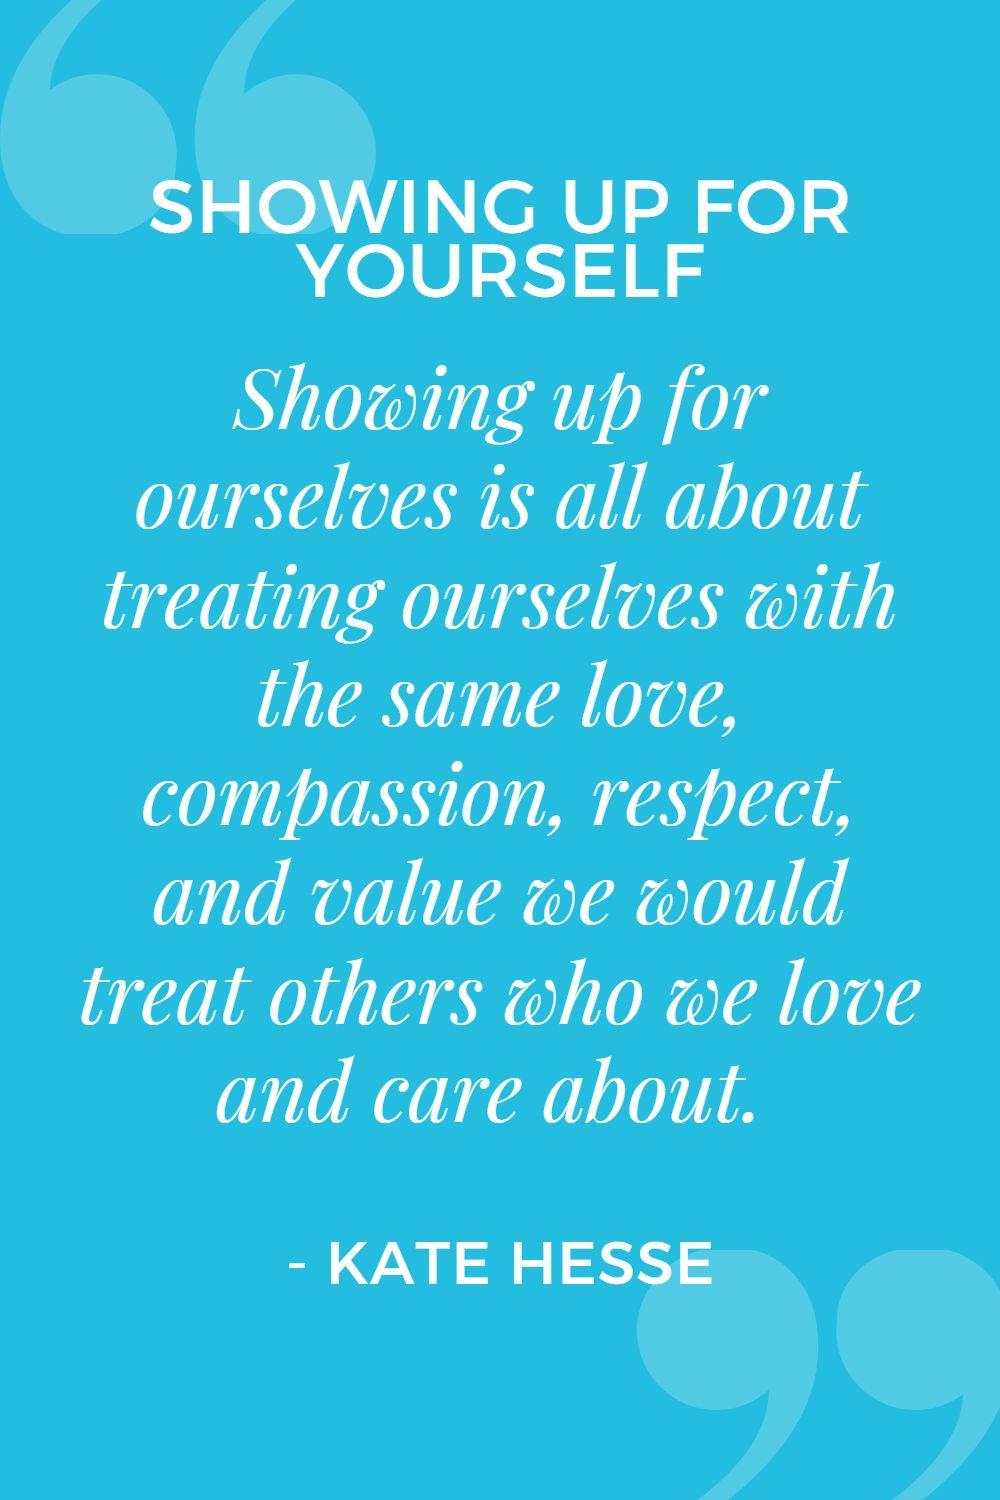 Showing up for ourselves is all about treating ourselves with the same love, compassion, respect, and value we would treat others who we love and care about with.